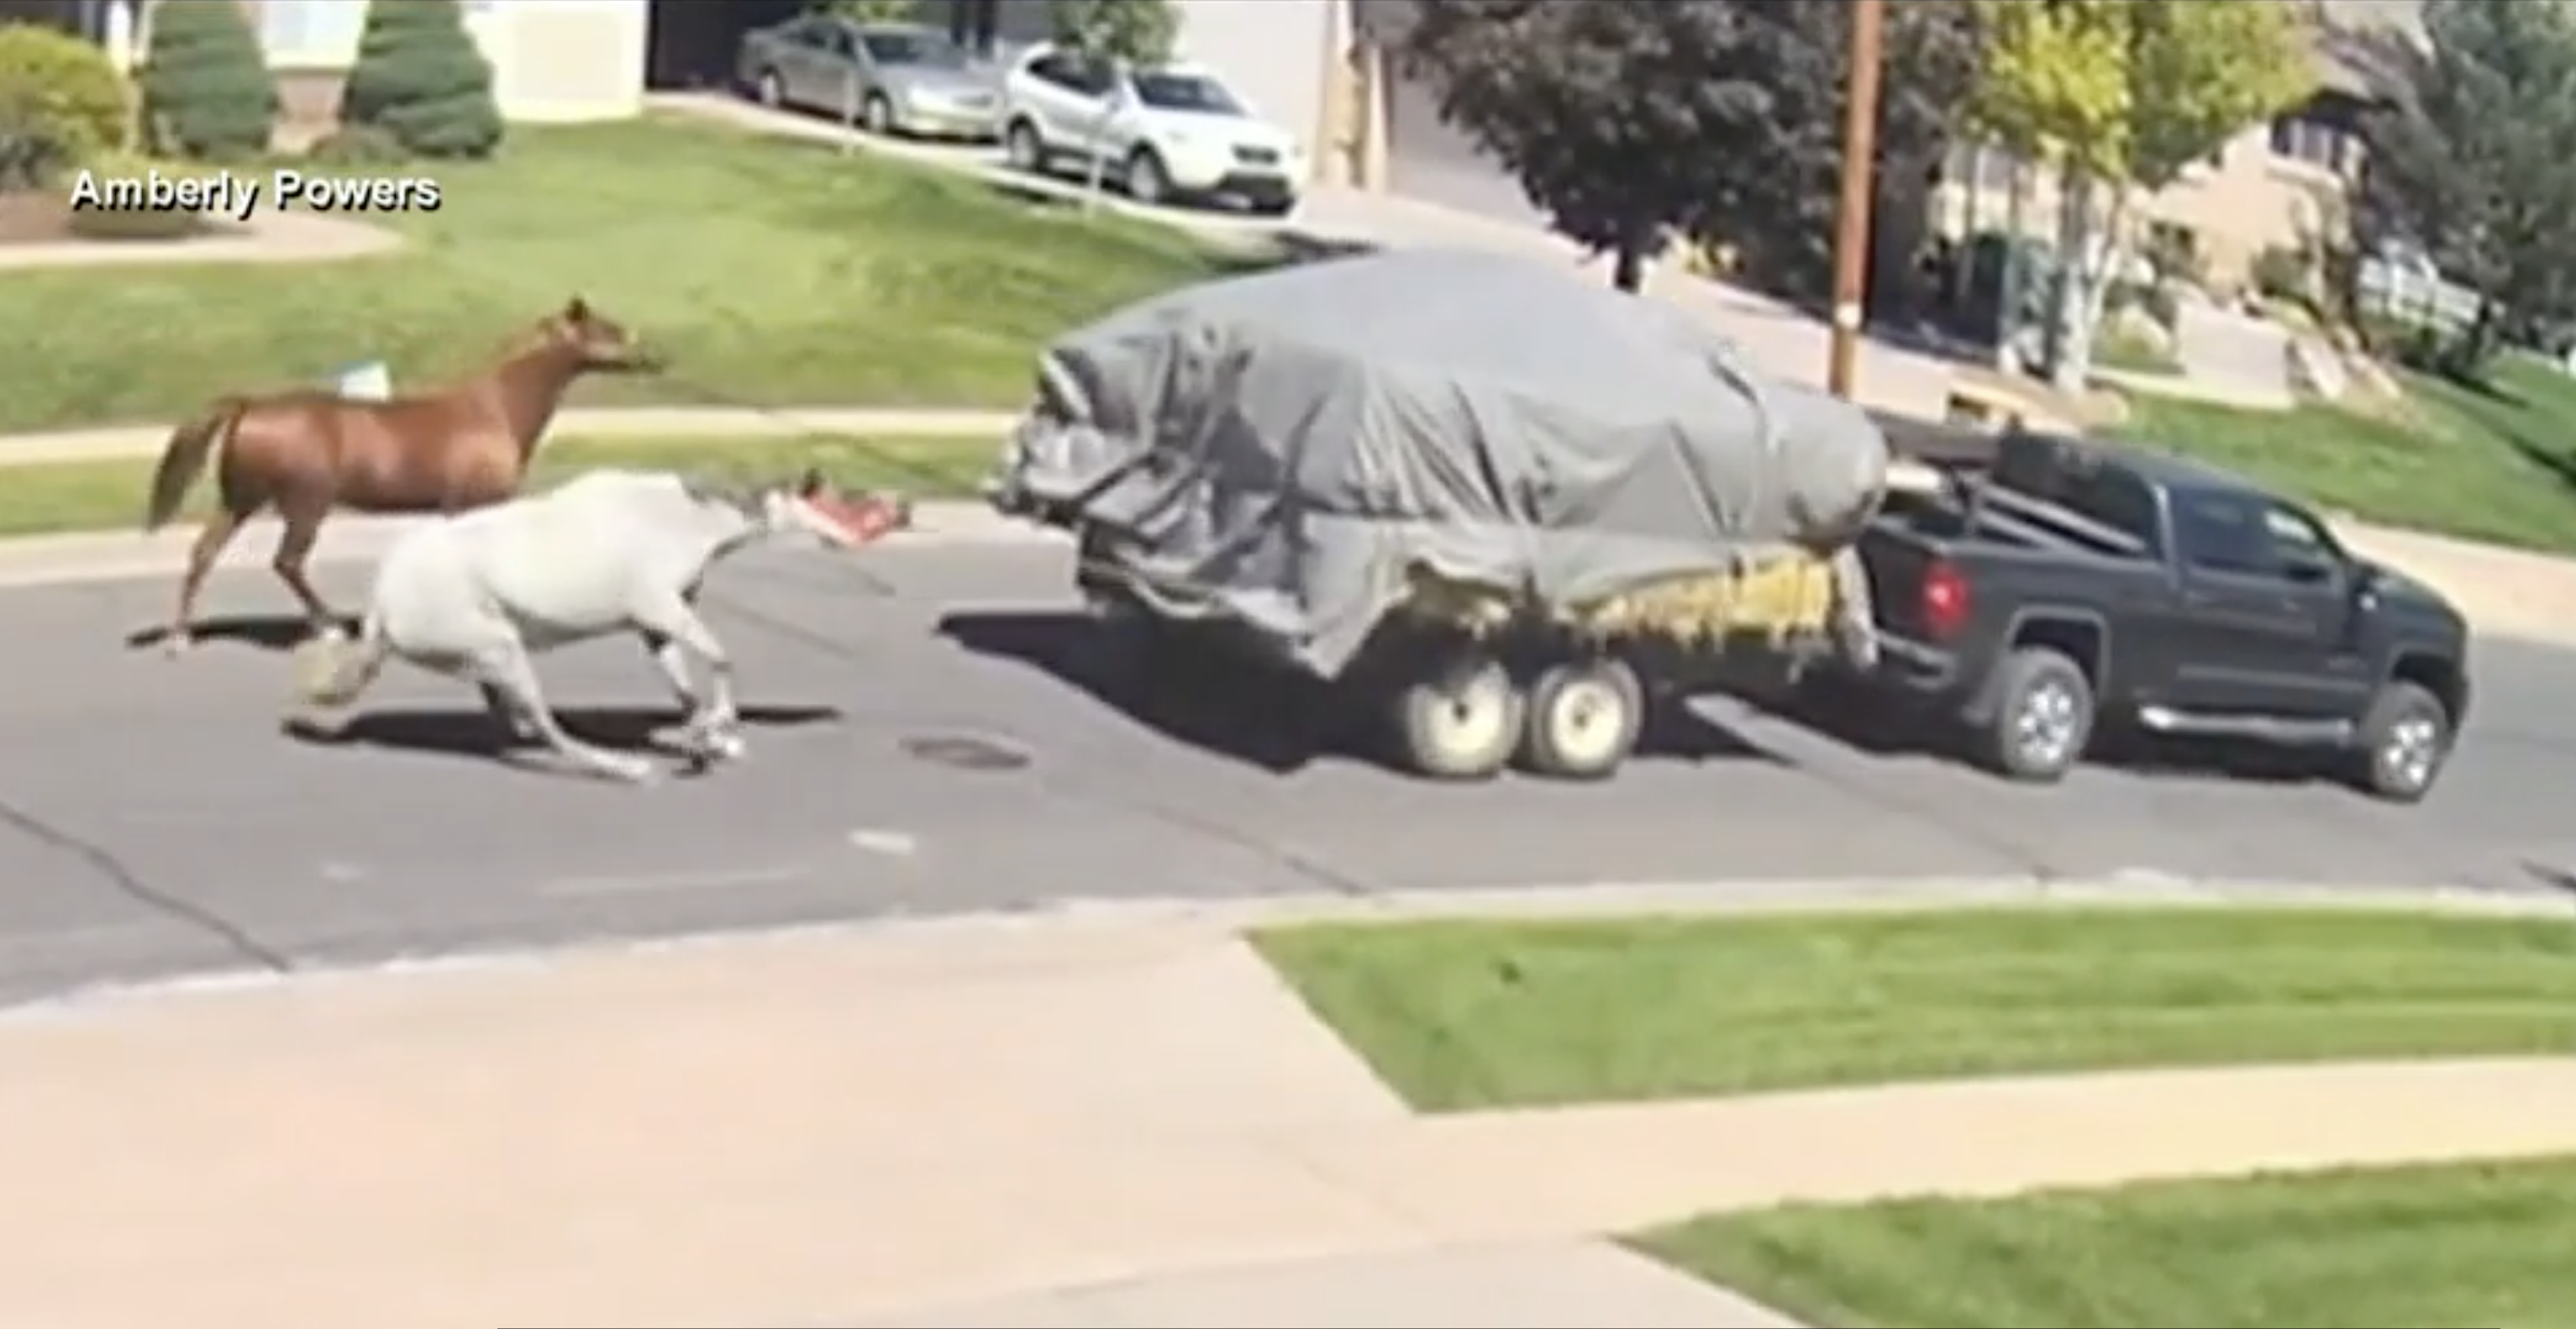 Humane Society of Utah Asks for Justice for Tethered Horses Dragged by Pickup Truck Driver